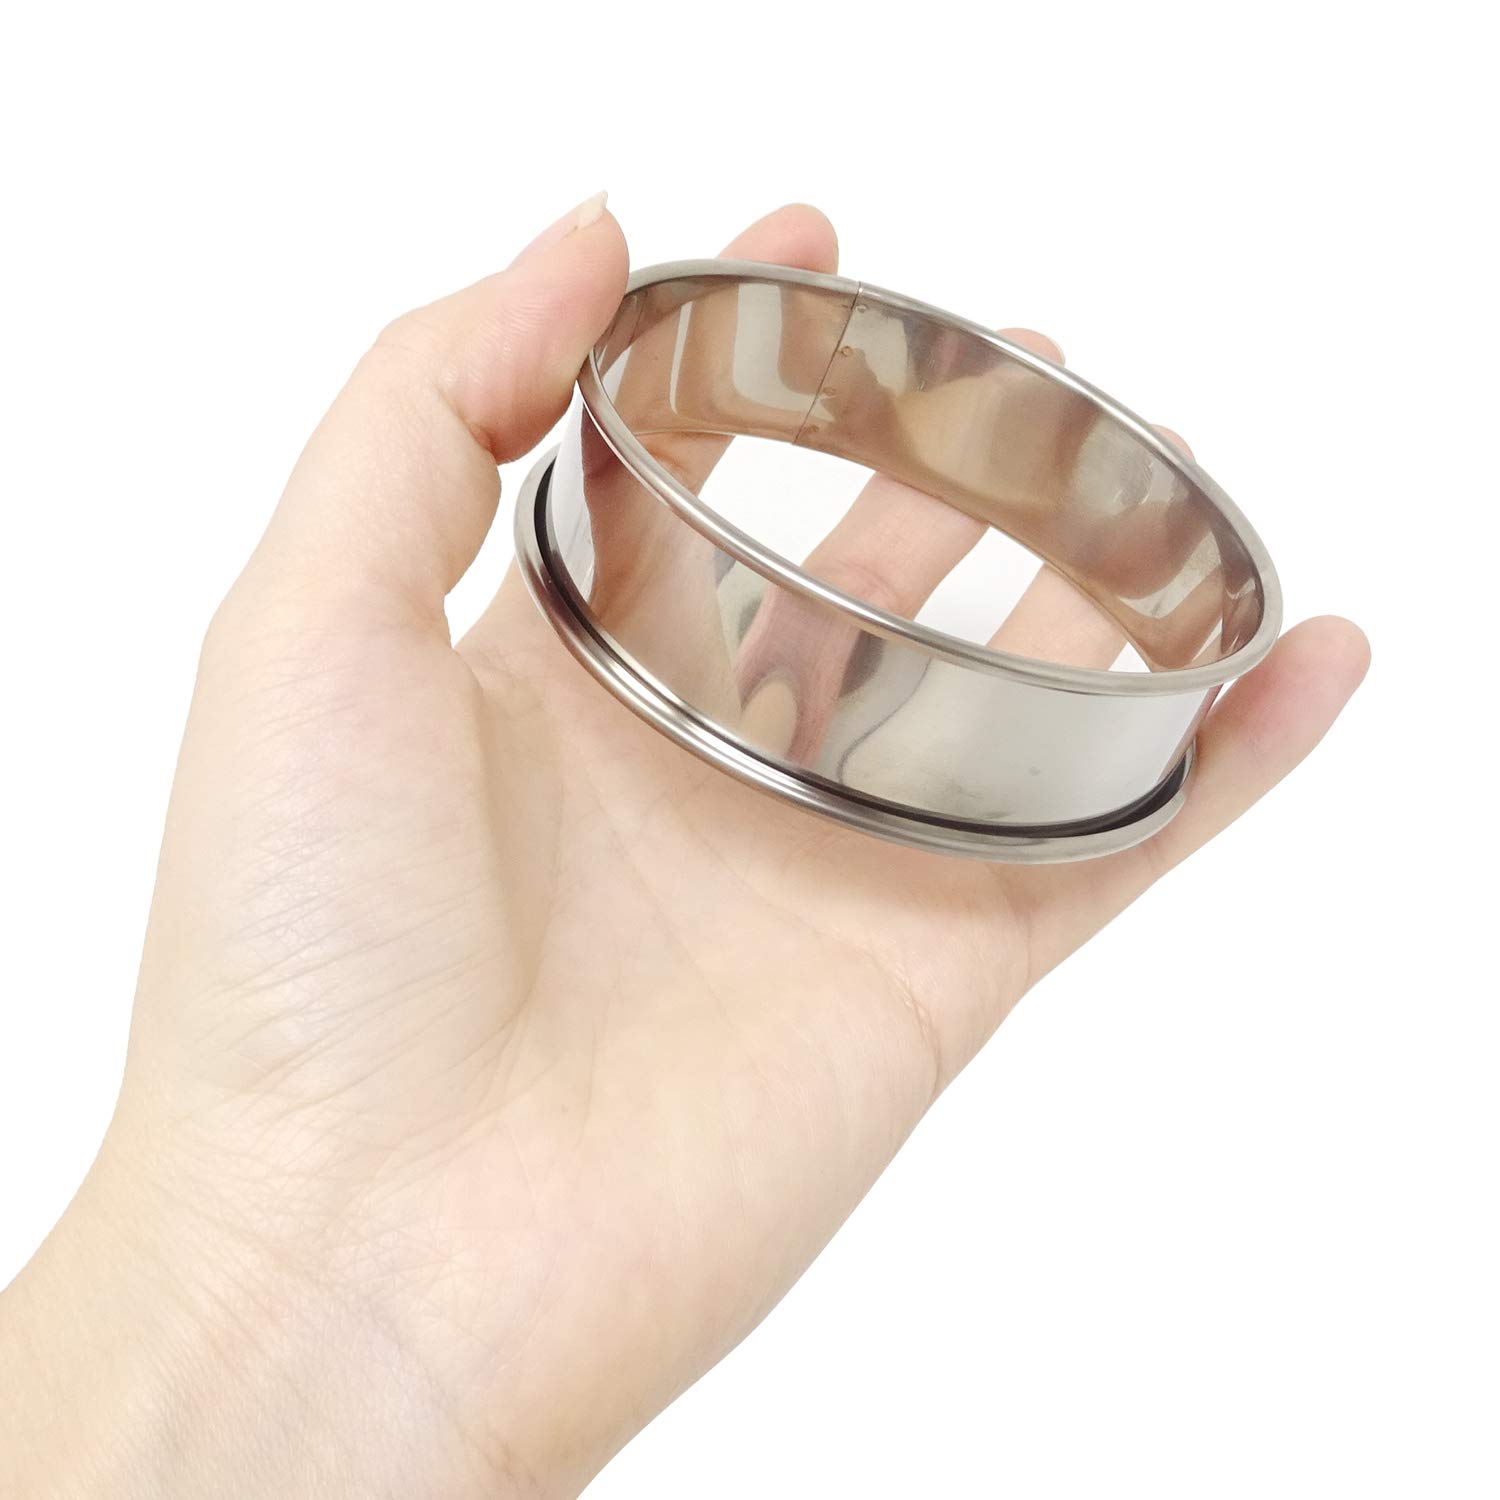 Honbay 4PCS Stainless Steel Muffin Rings Double Rolled Tart Rings Mousse Rings Mini Cake Mold Crumpet Baking Ring Mold For Kitchen Bakery (80mm/3.15")